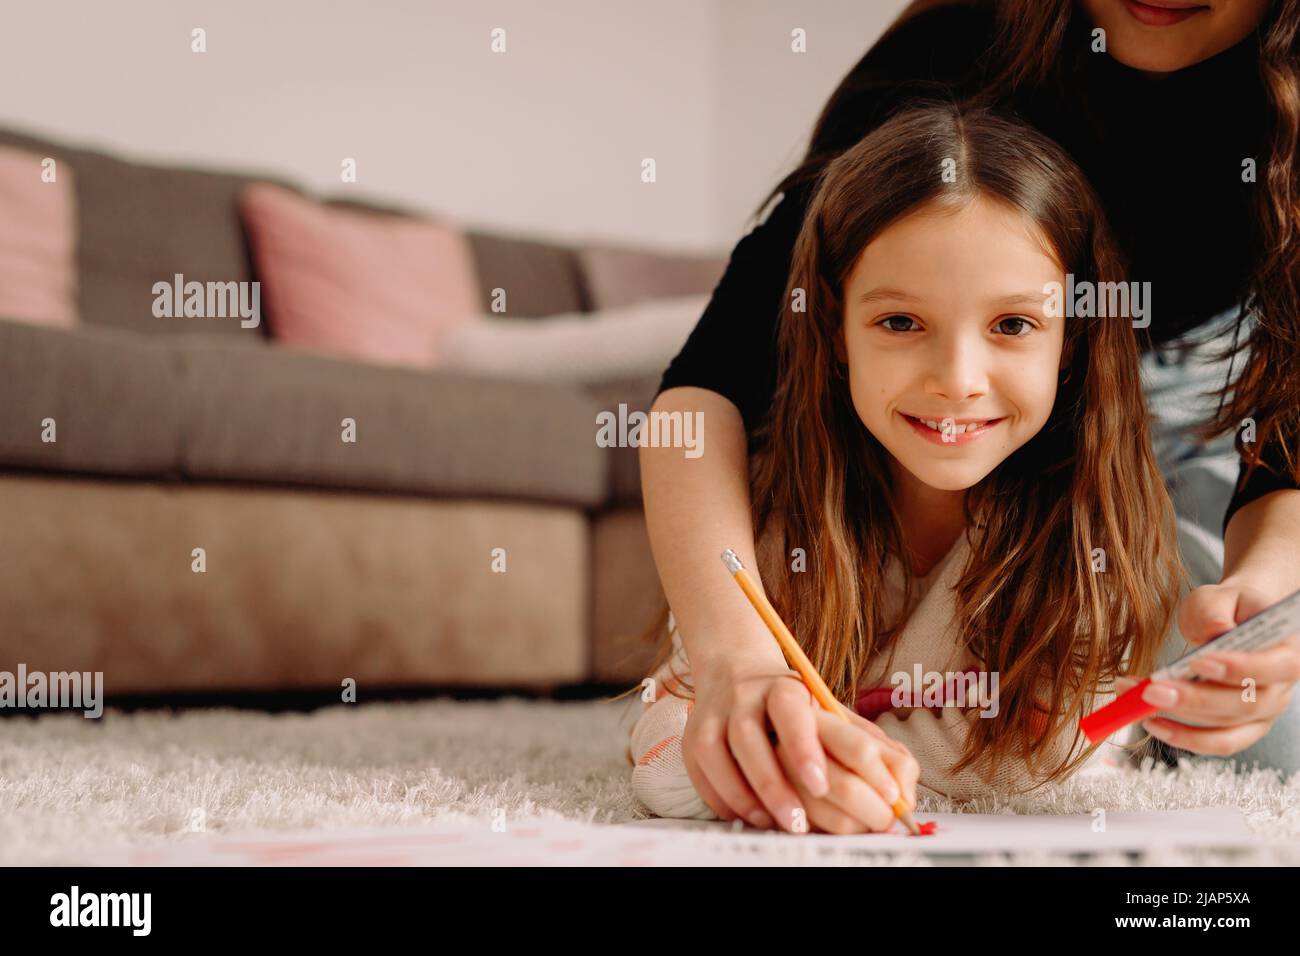 Little pretty blond girl smiling together with her mother at home drawing on the papre using red pencil, family time together concept. Stock Photo